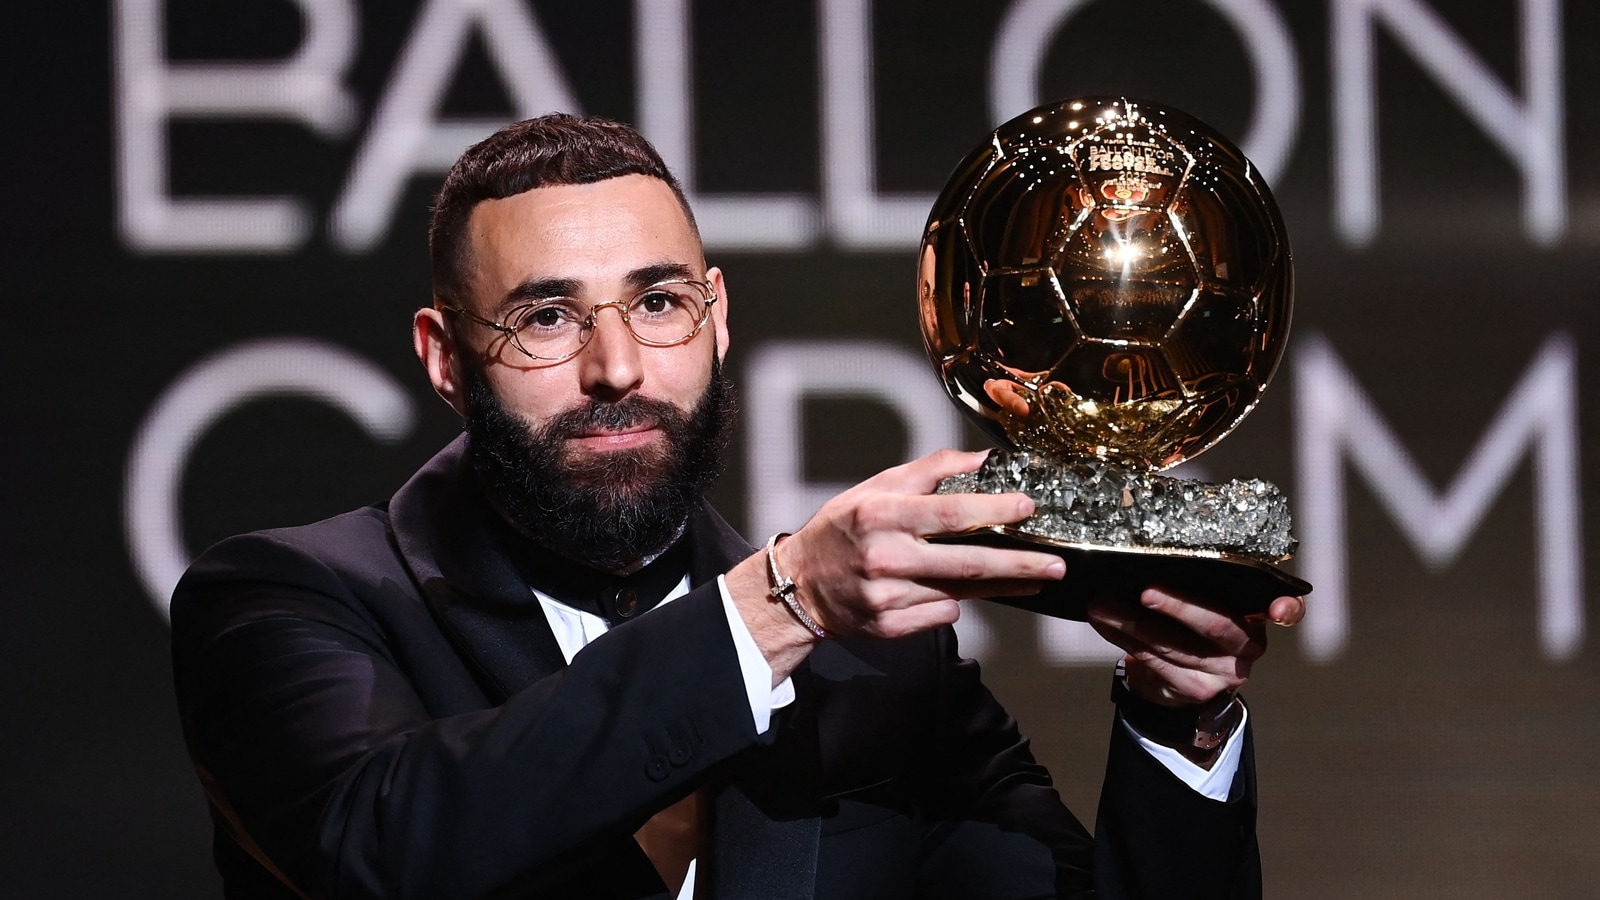 A Look At The List Of Ballon d'Or Winners Over The Years